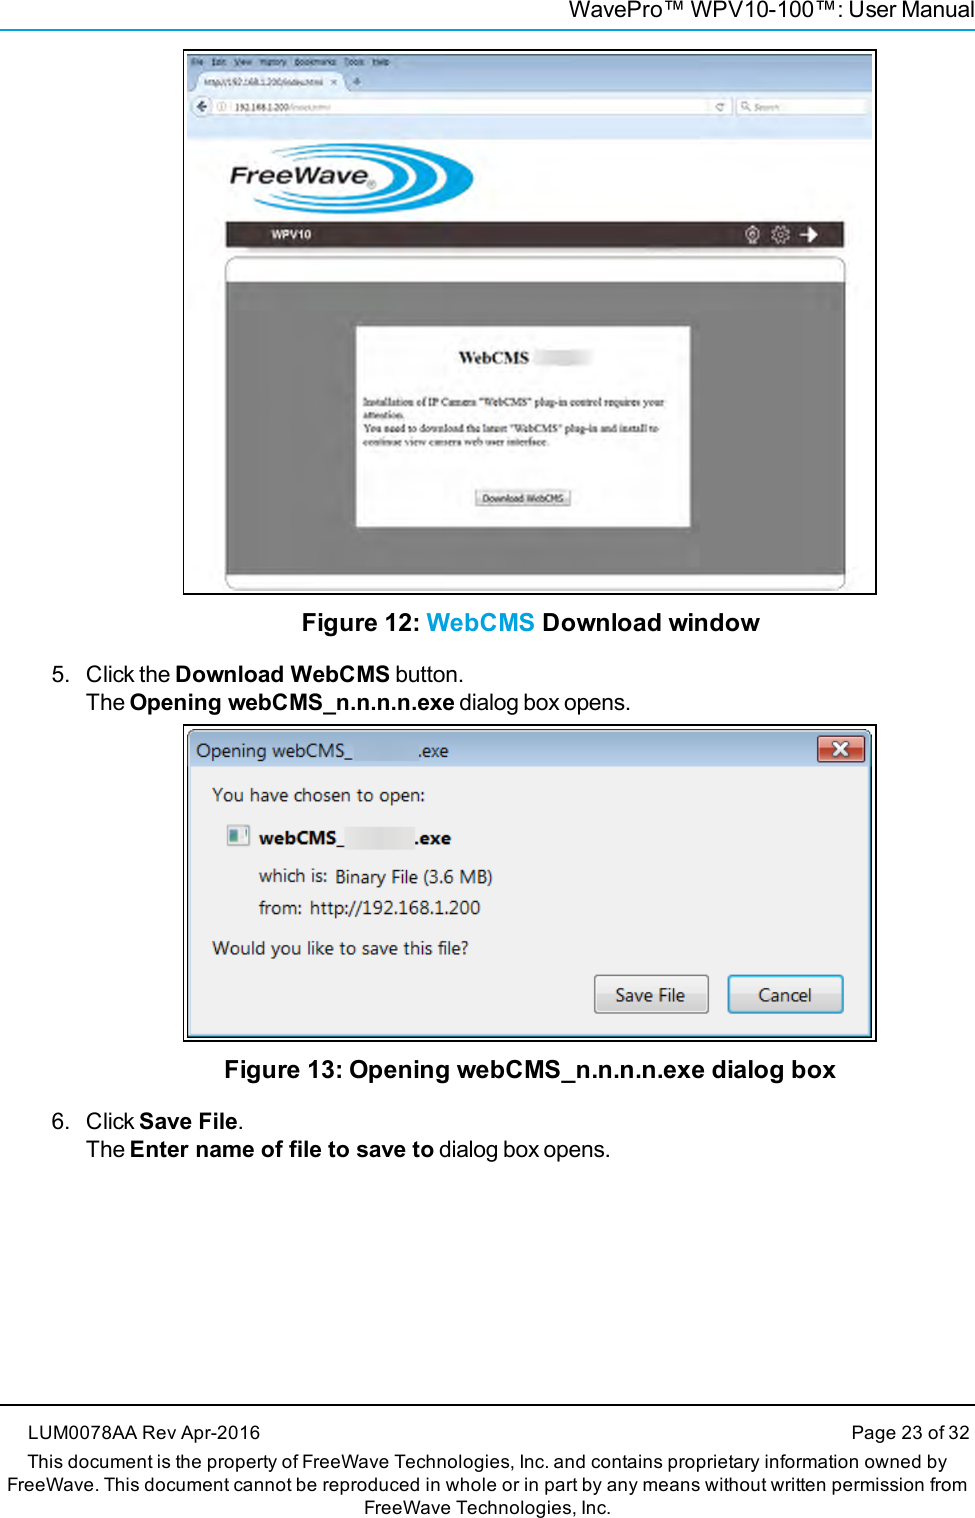 WavePro™ WPV10-100™: User ManualFigure 12: WebCMS Download window5. Click the Download WebCMS button.The Opening webCMS_n.n.n.n.exe dialog box opens.Figure 13: Opening webCMS_n.n.n.n.exe dialog box6. Click Save File.The Enter name of file to save to dialog box opens.LUM0078AA Rev Apr-2016 Page 23 of 32This document is the property of FreeWave Technologies, Inc. and contains proprietary information owned byFreeWave. This document cannot be reproduced in whole or in part by any means without written permission fromFreeWave Technologies, Inc.